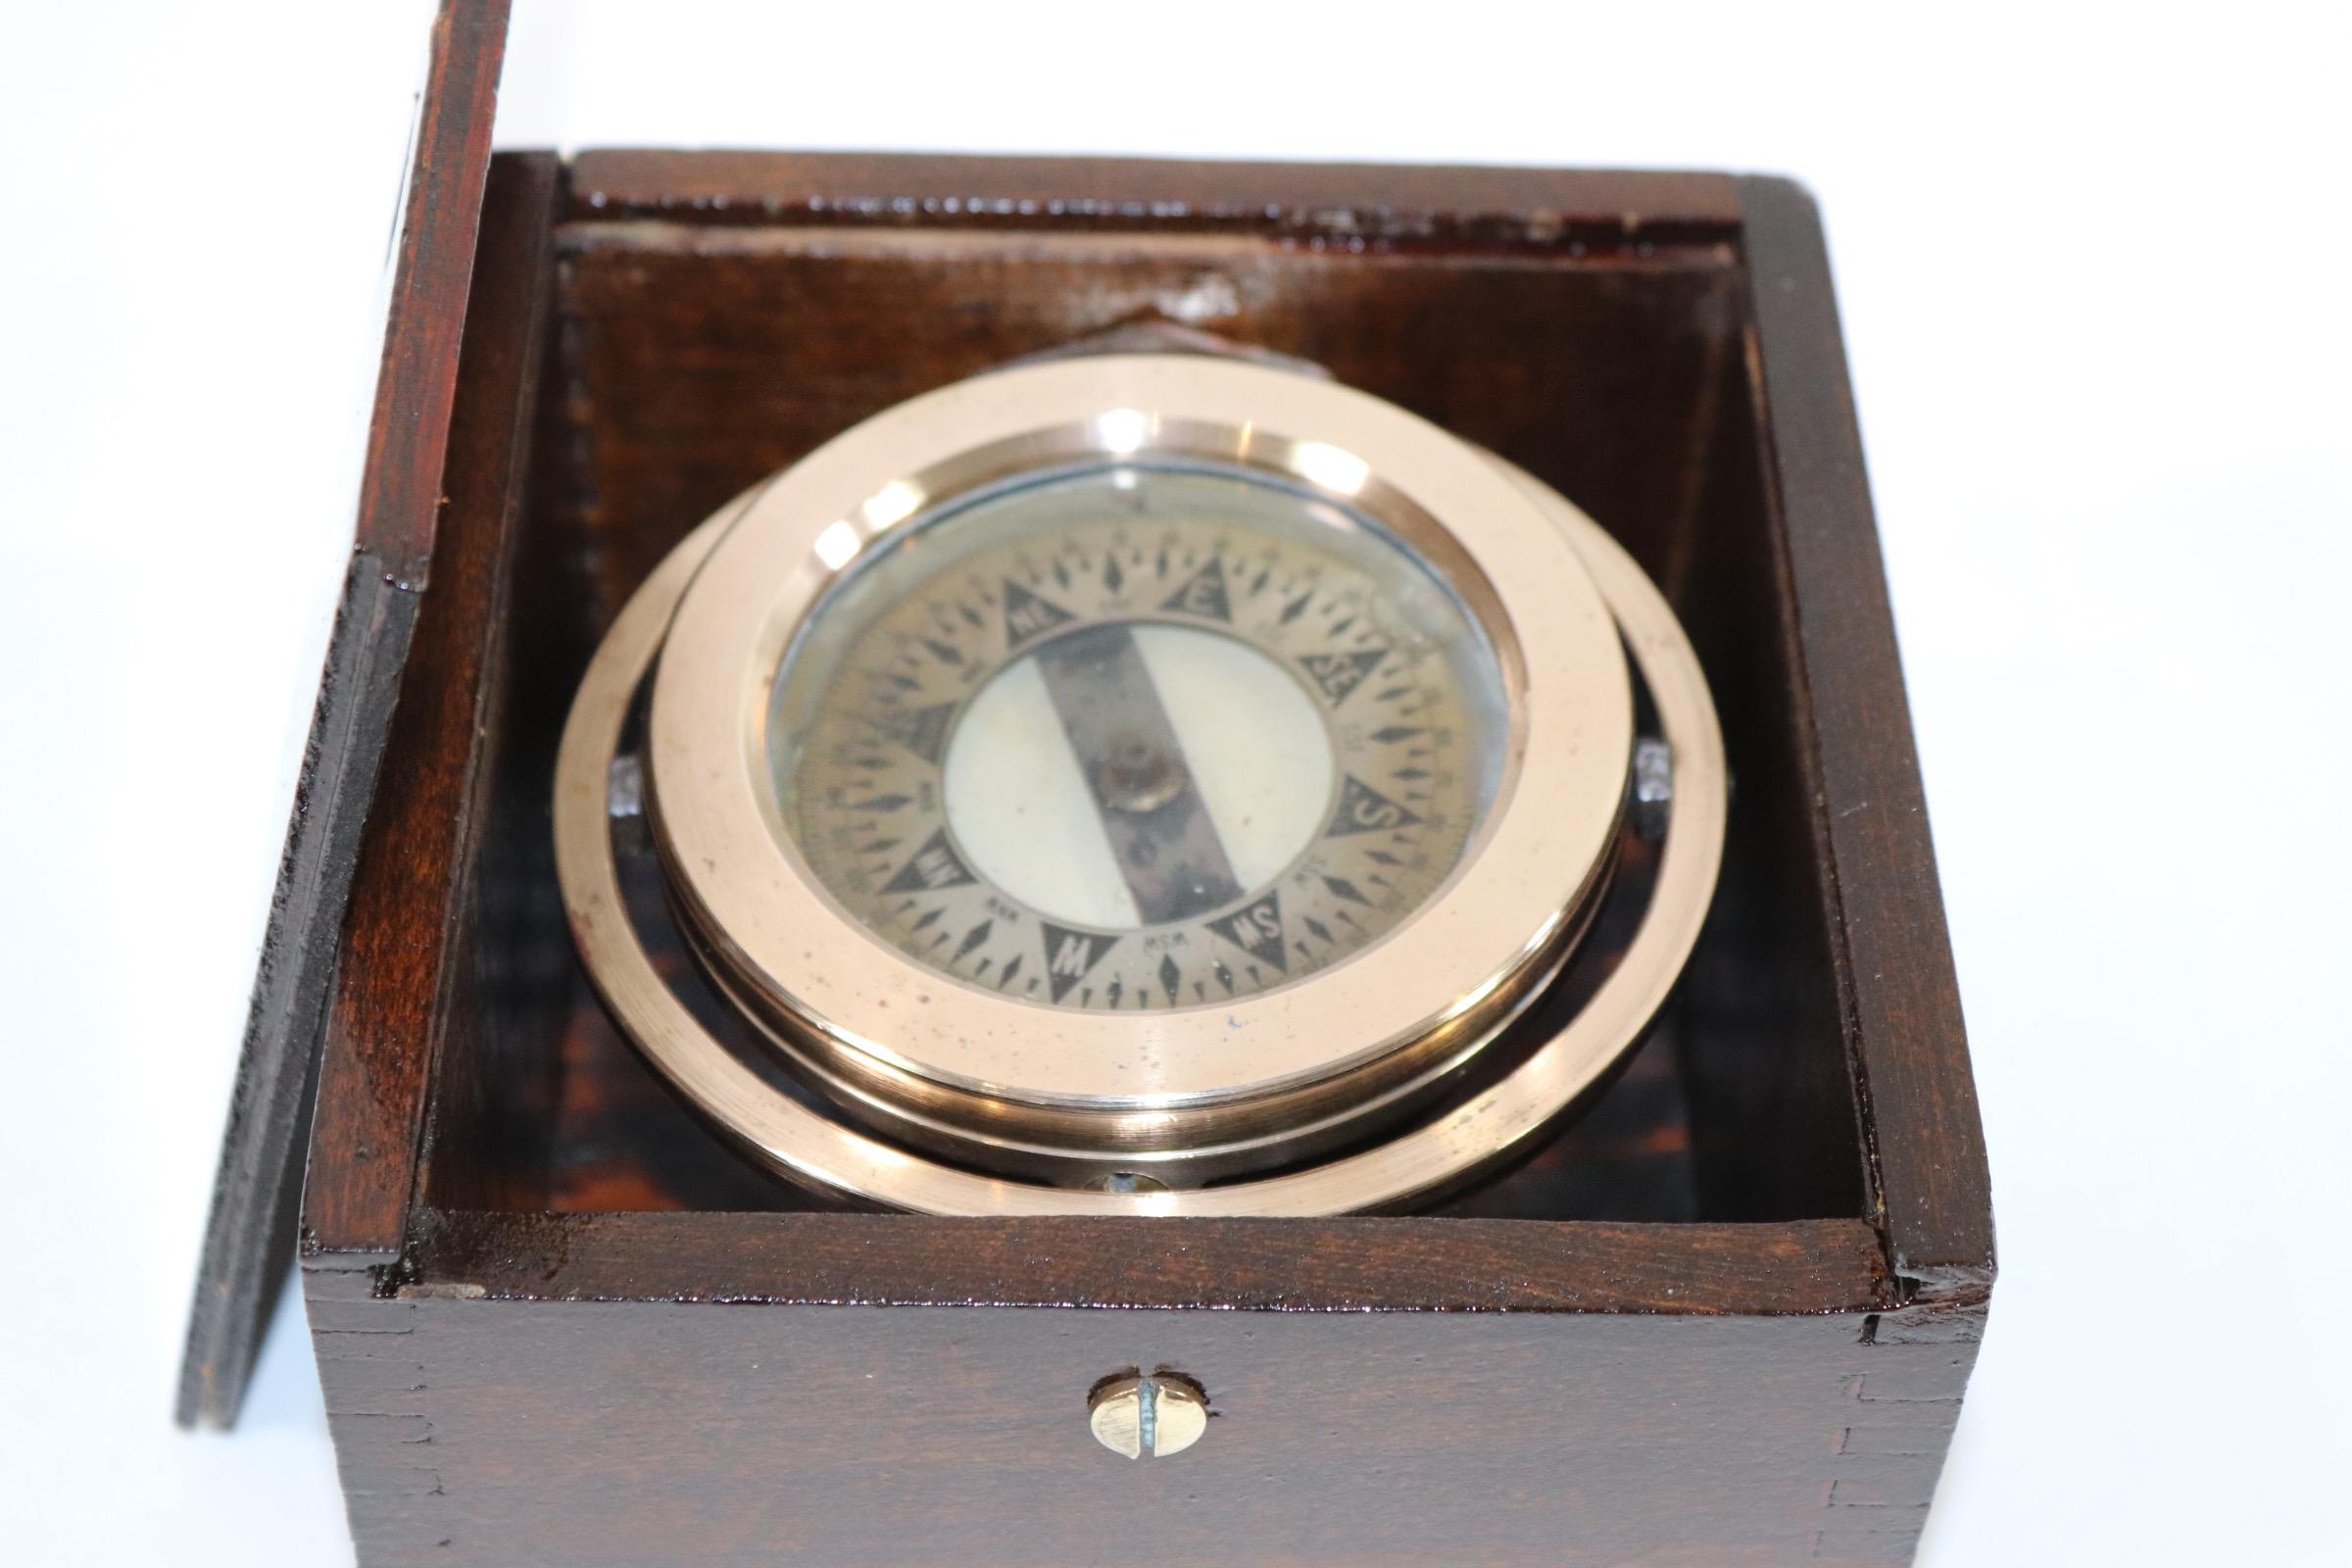 Polished brass boat compass fitted to a dovetailed box with varnish finish. Weight is 2 pounds.